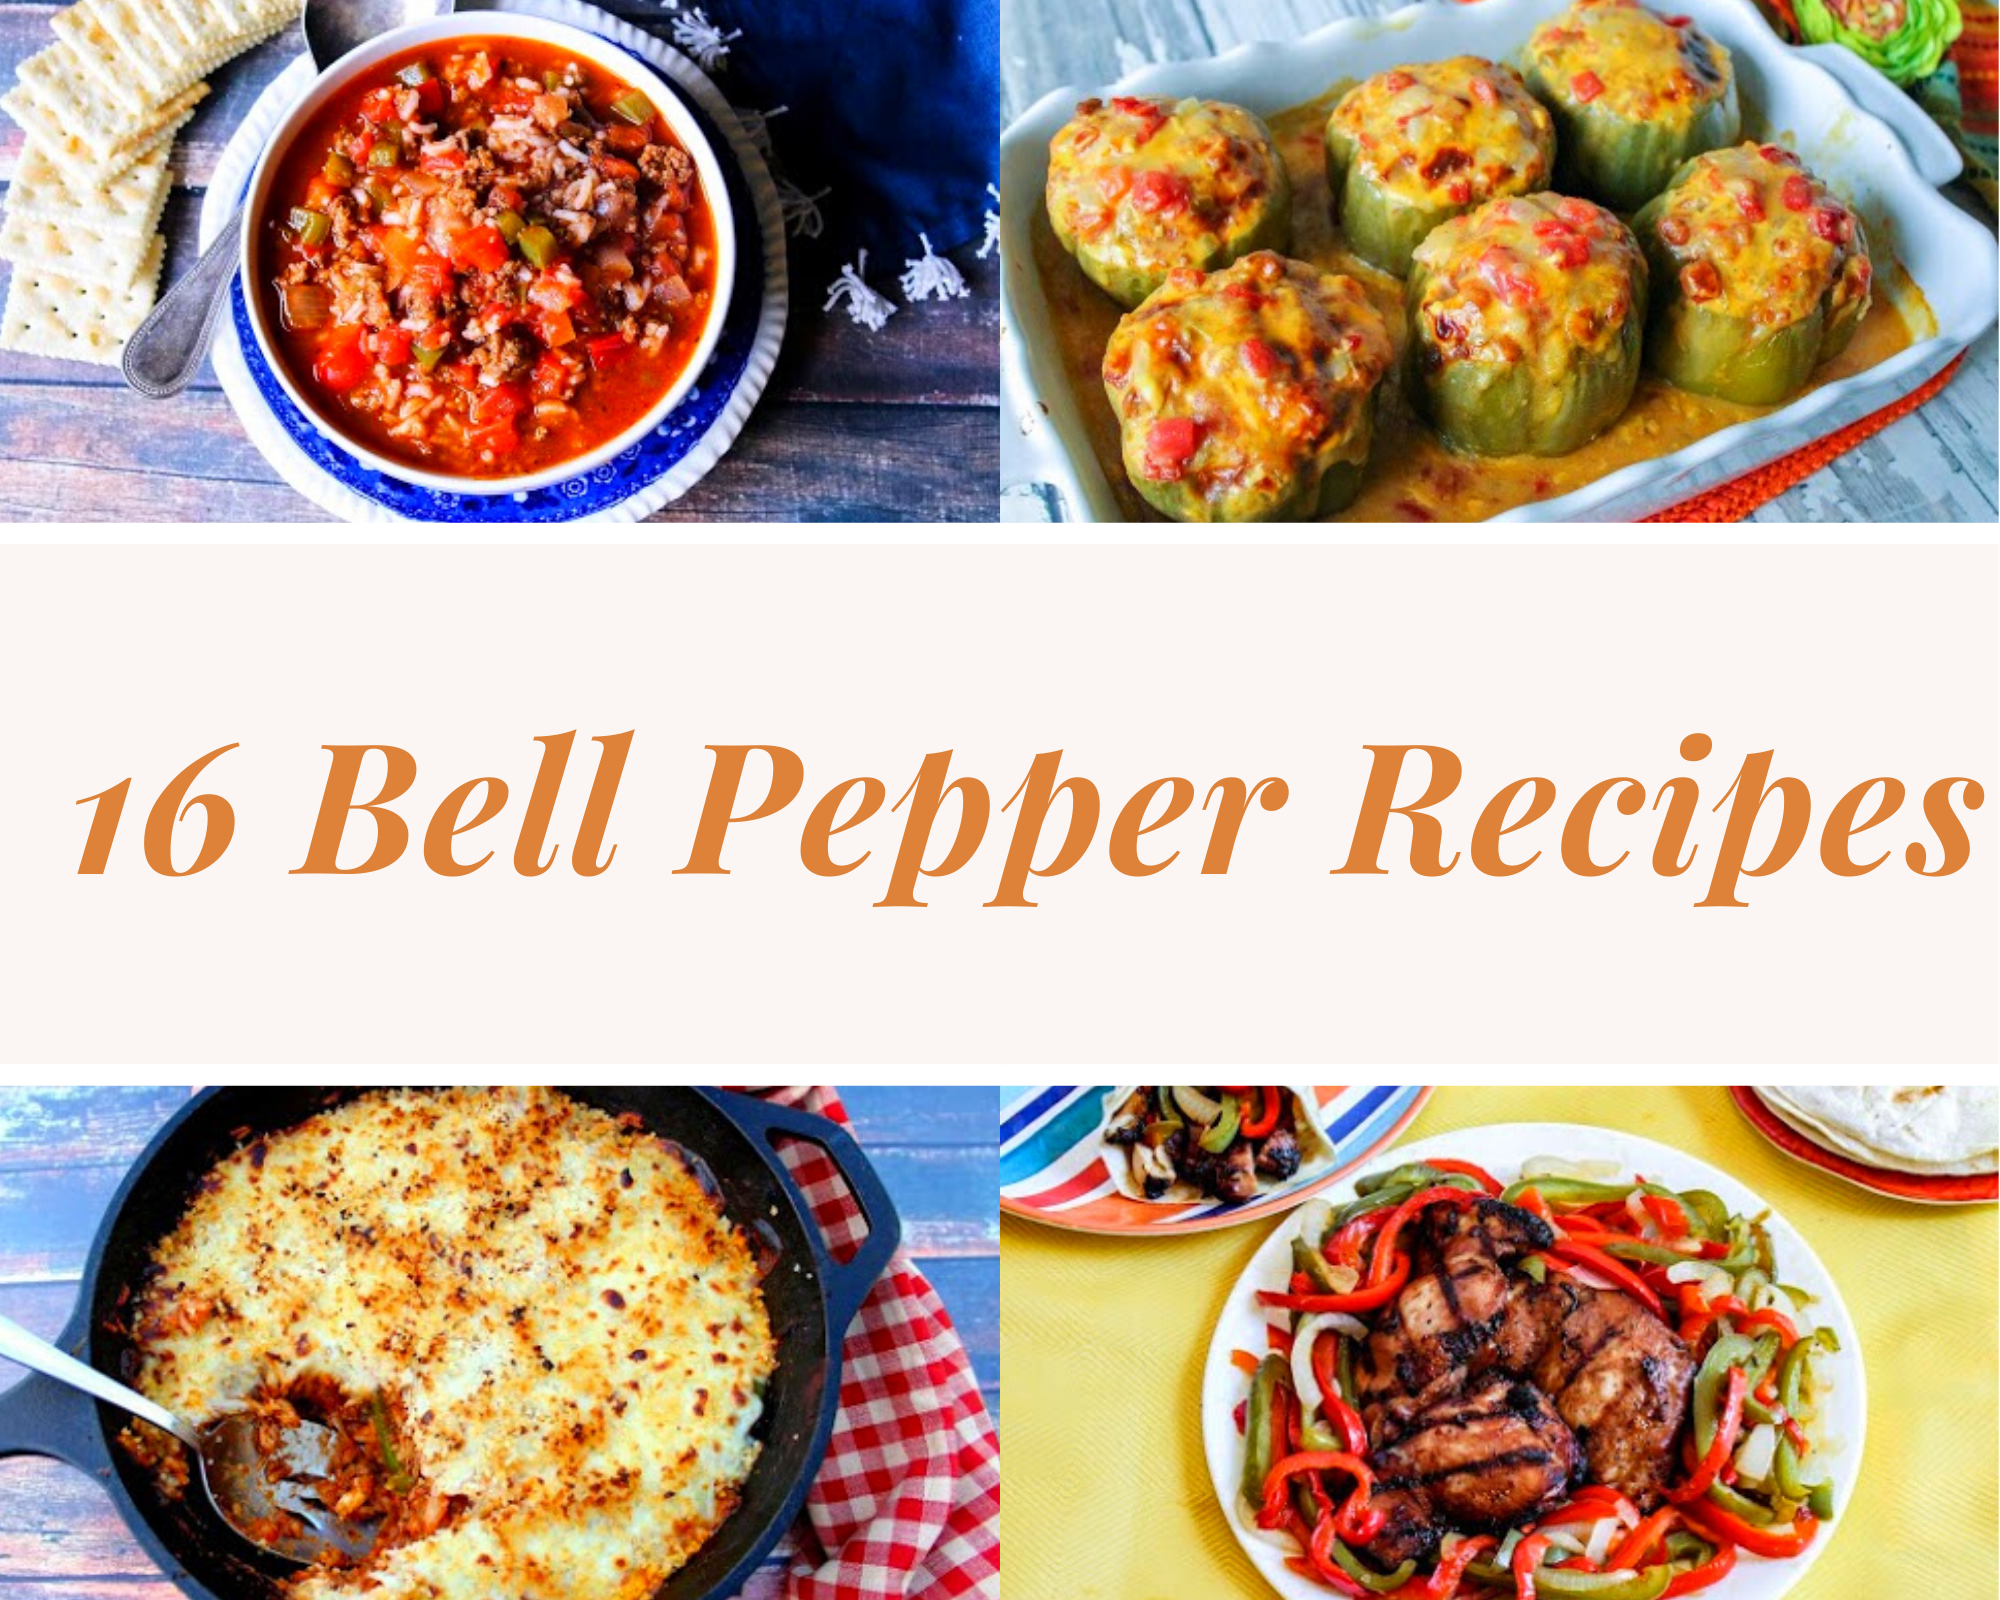 Stuffed bell peppers, fajitas, bell pepper soup and more